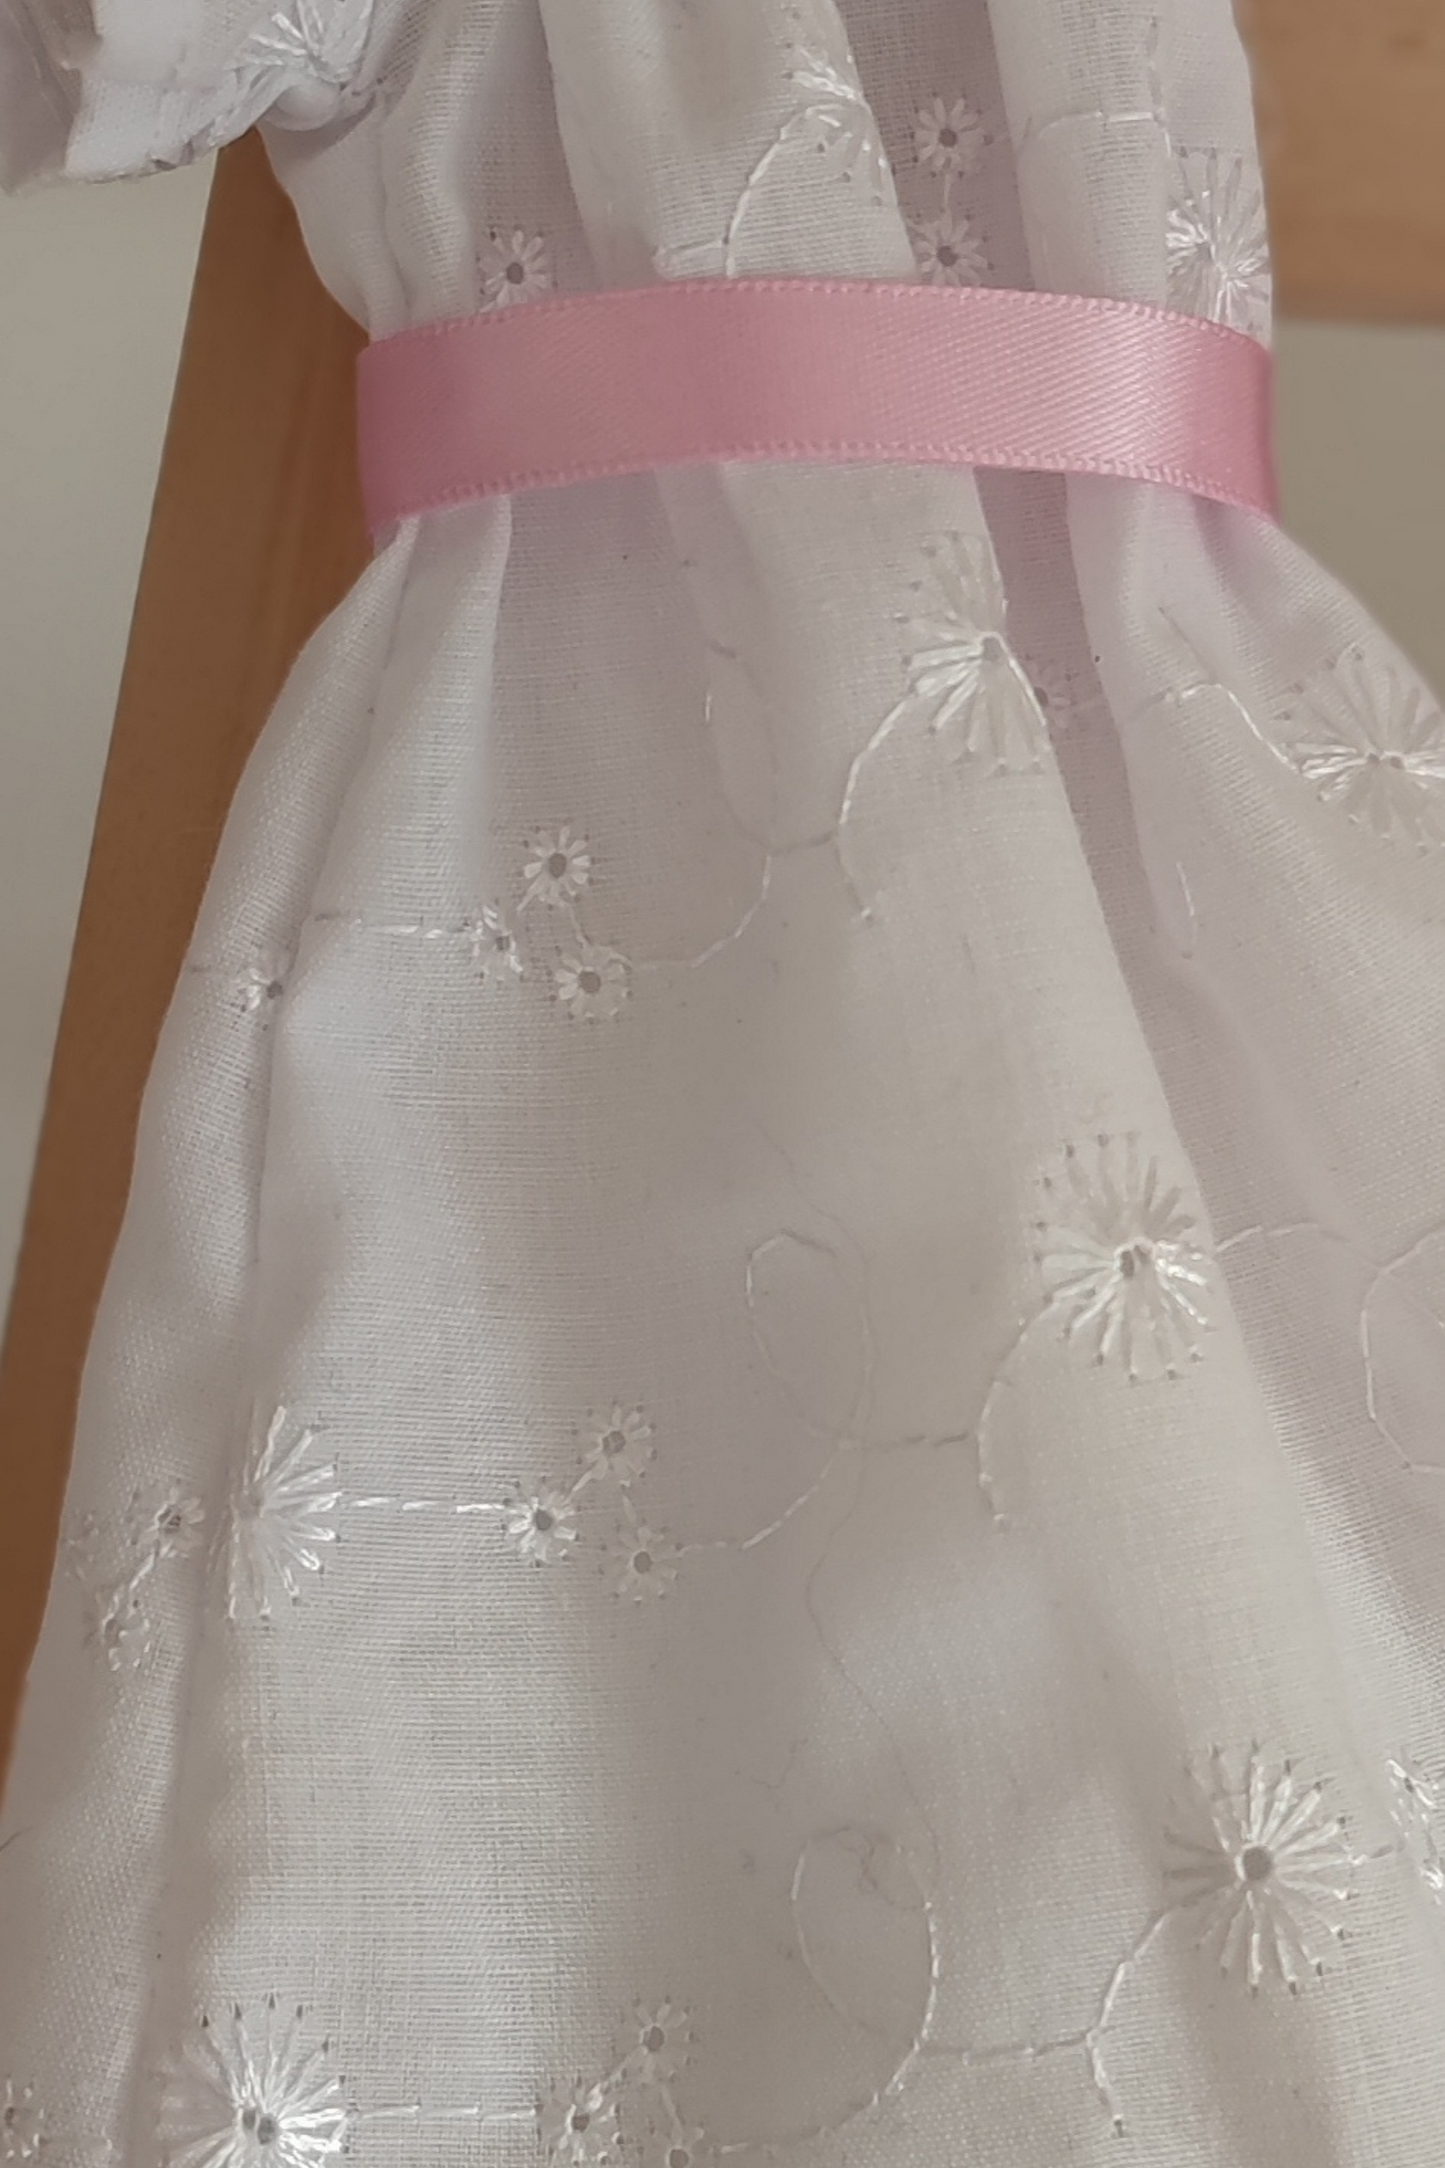 White doll dress with embroidery